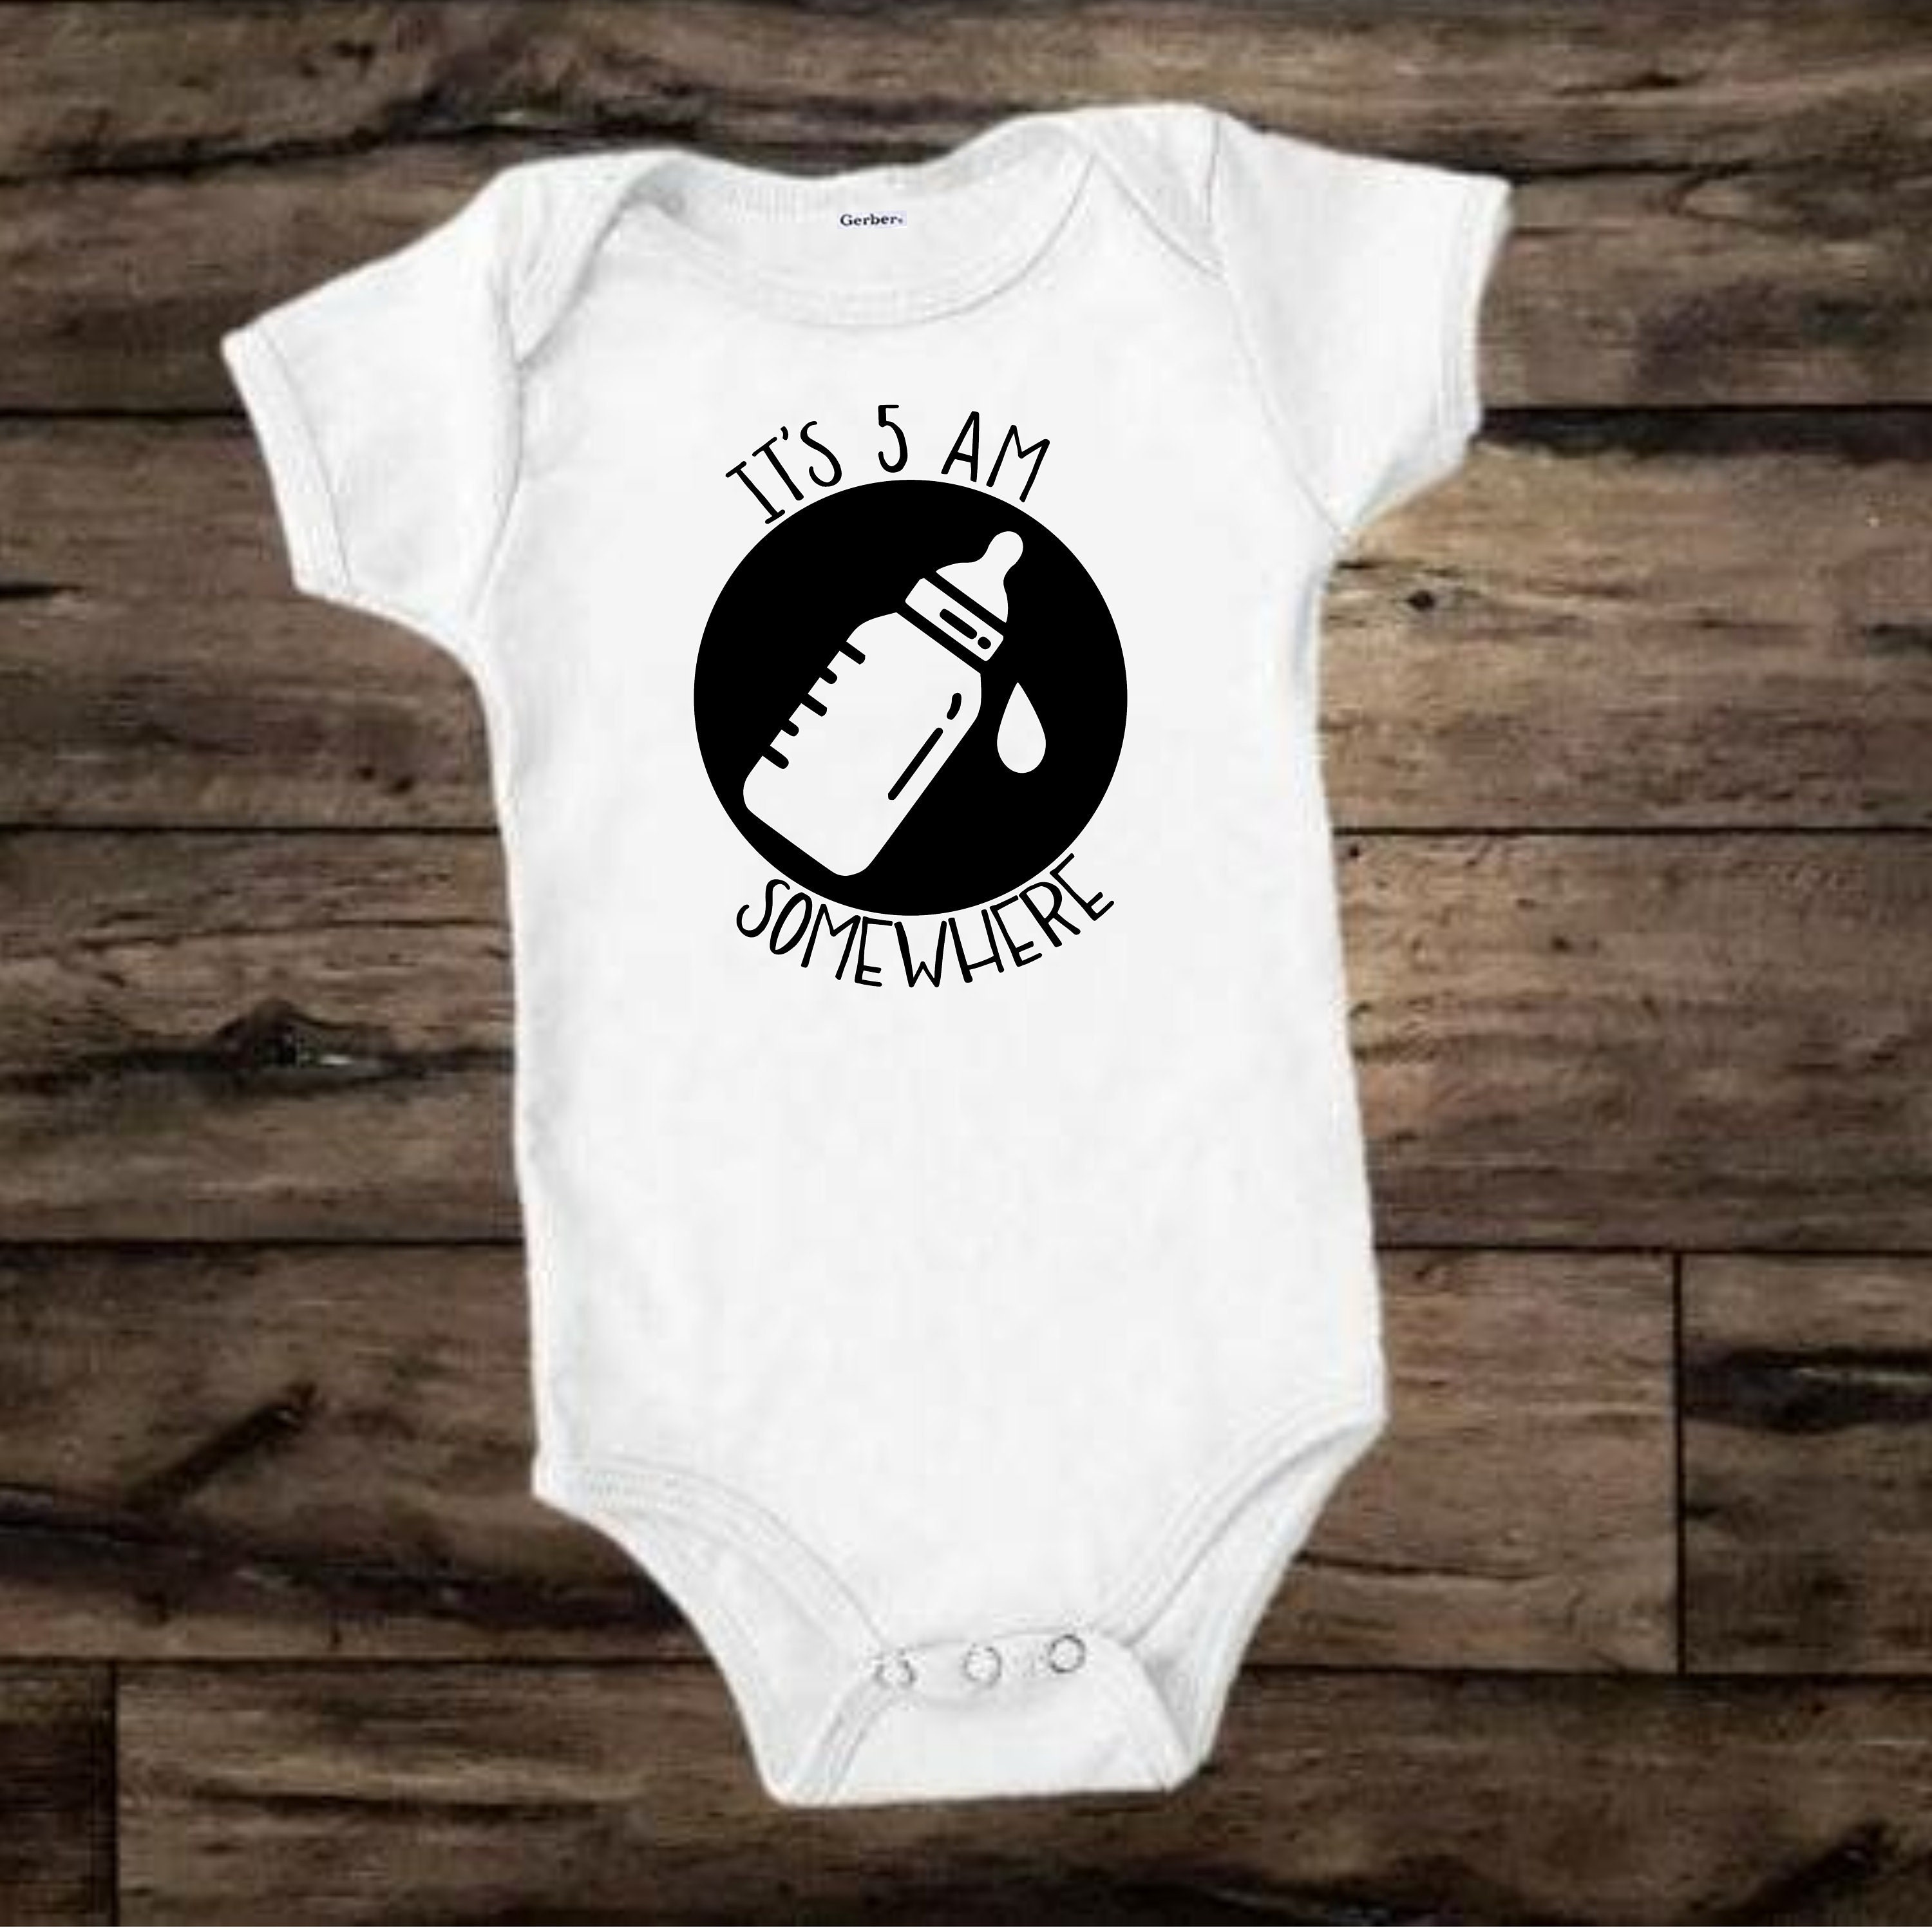 It's 5 AM Somewhere Funny Baby Onesie – Dad and Lads